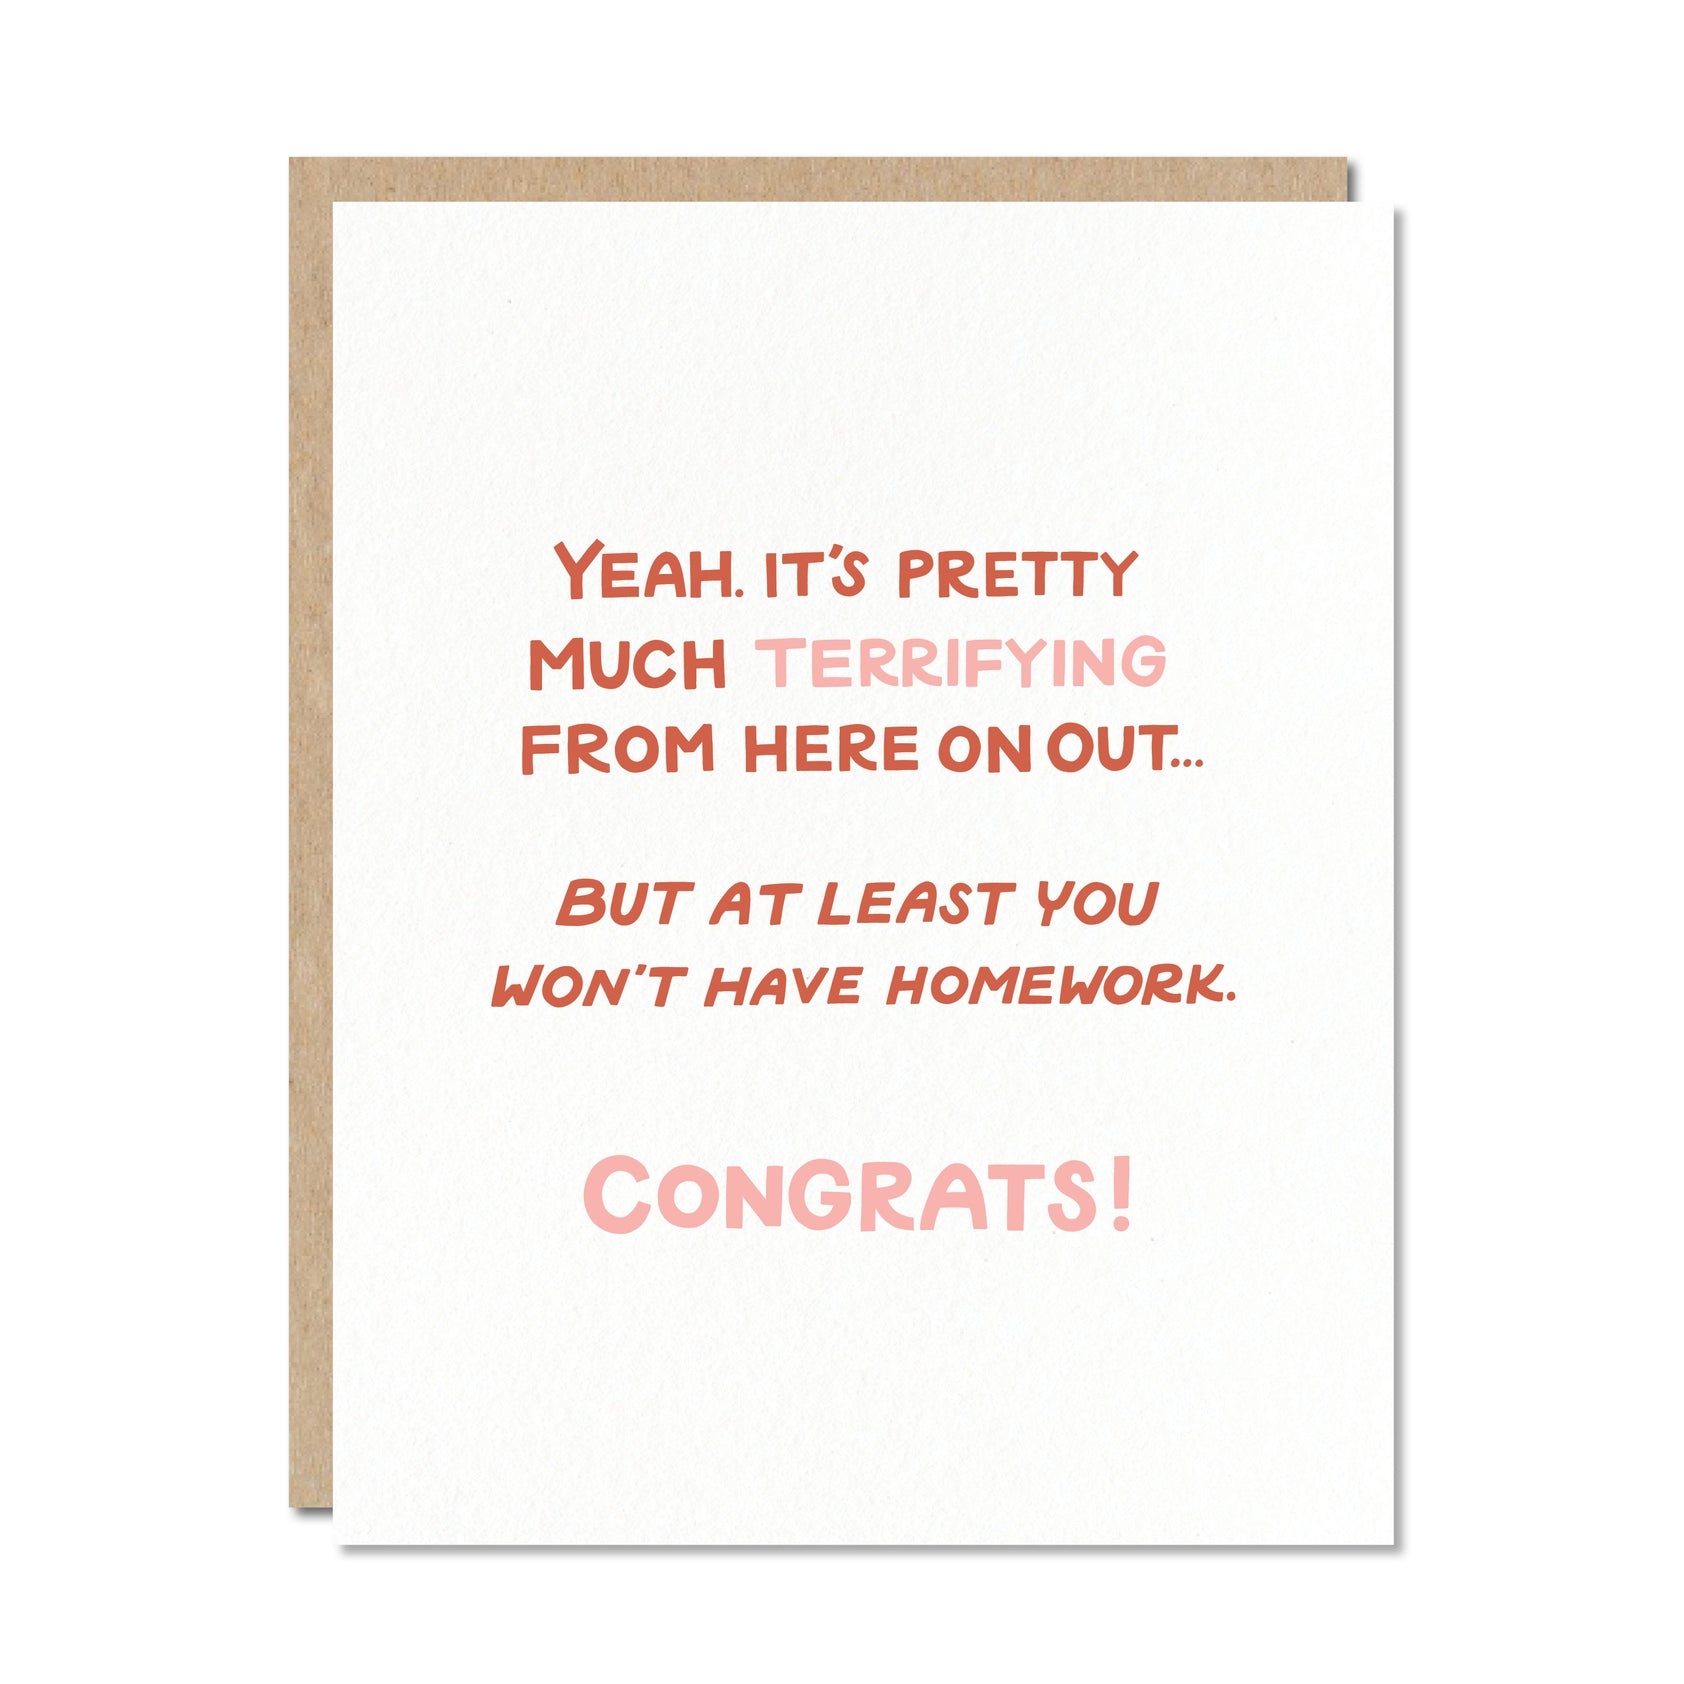 Greeting card with white background and pink and rust text says,  "Yeah. It's pretty much terrifying from here on out... but at least you won't have homework. Congrats!". Kraft envelope is included. 